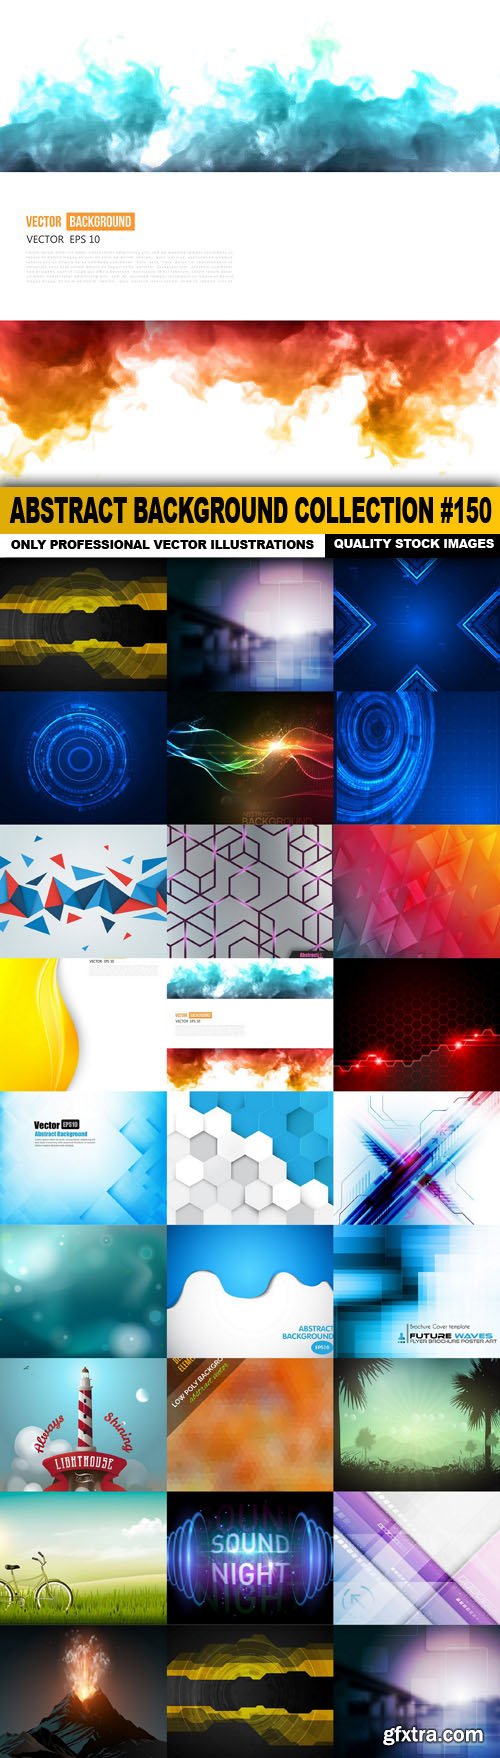 Abstract Background Collection #150 - 25 Vector